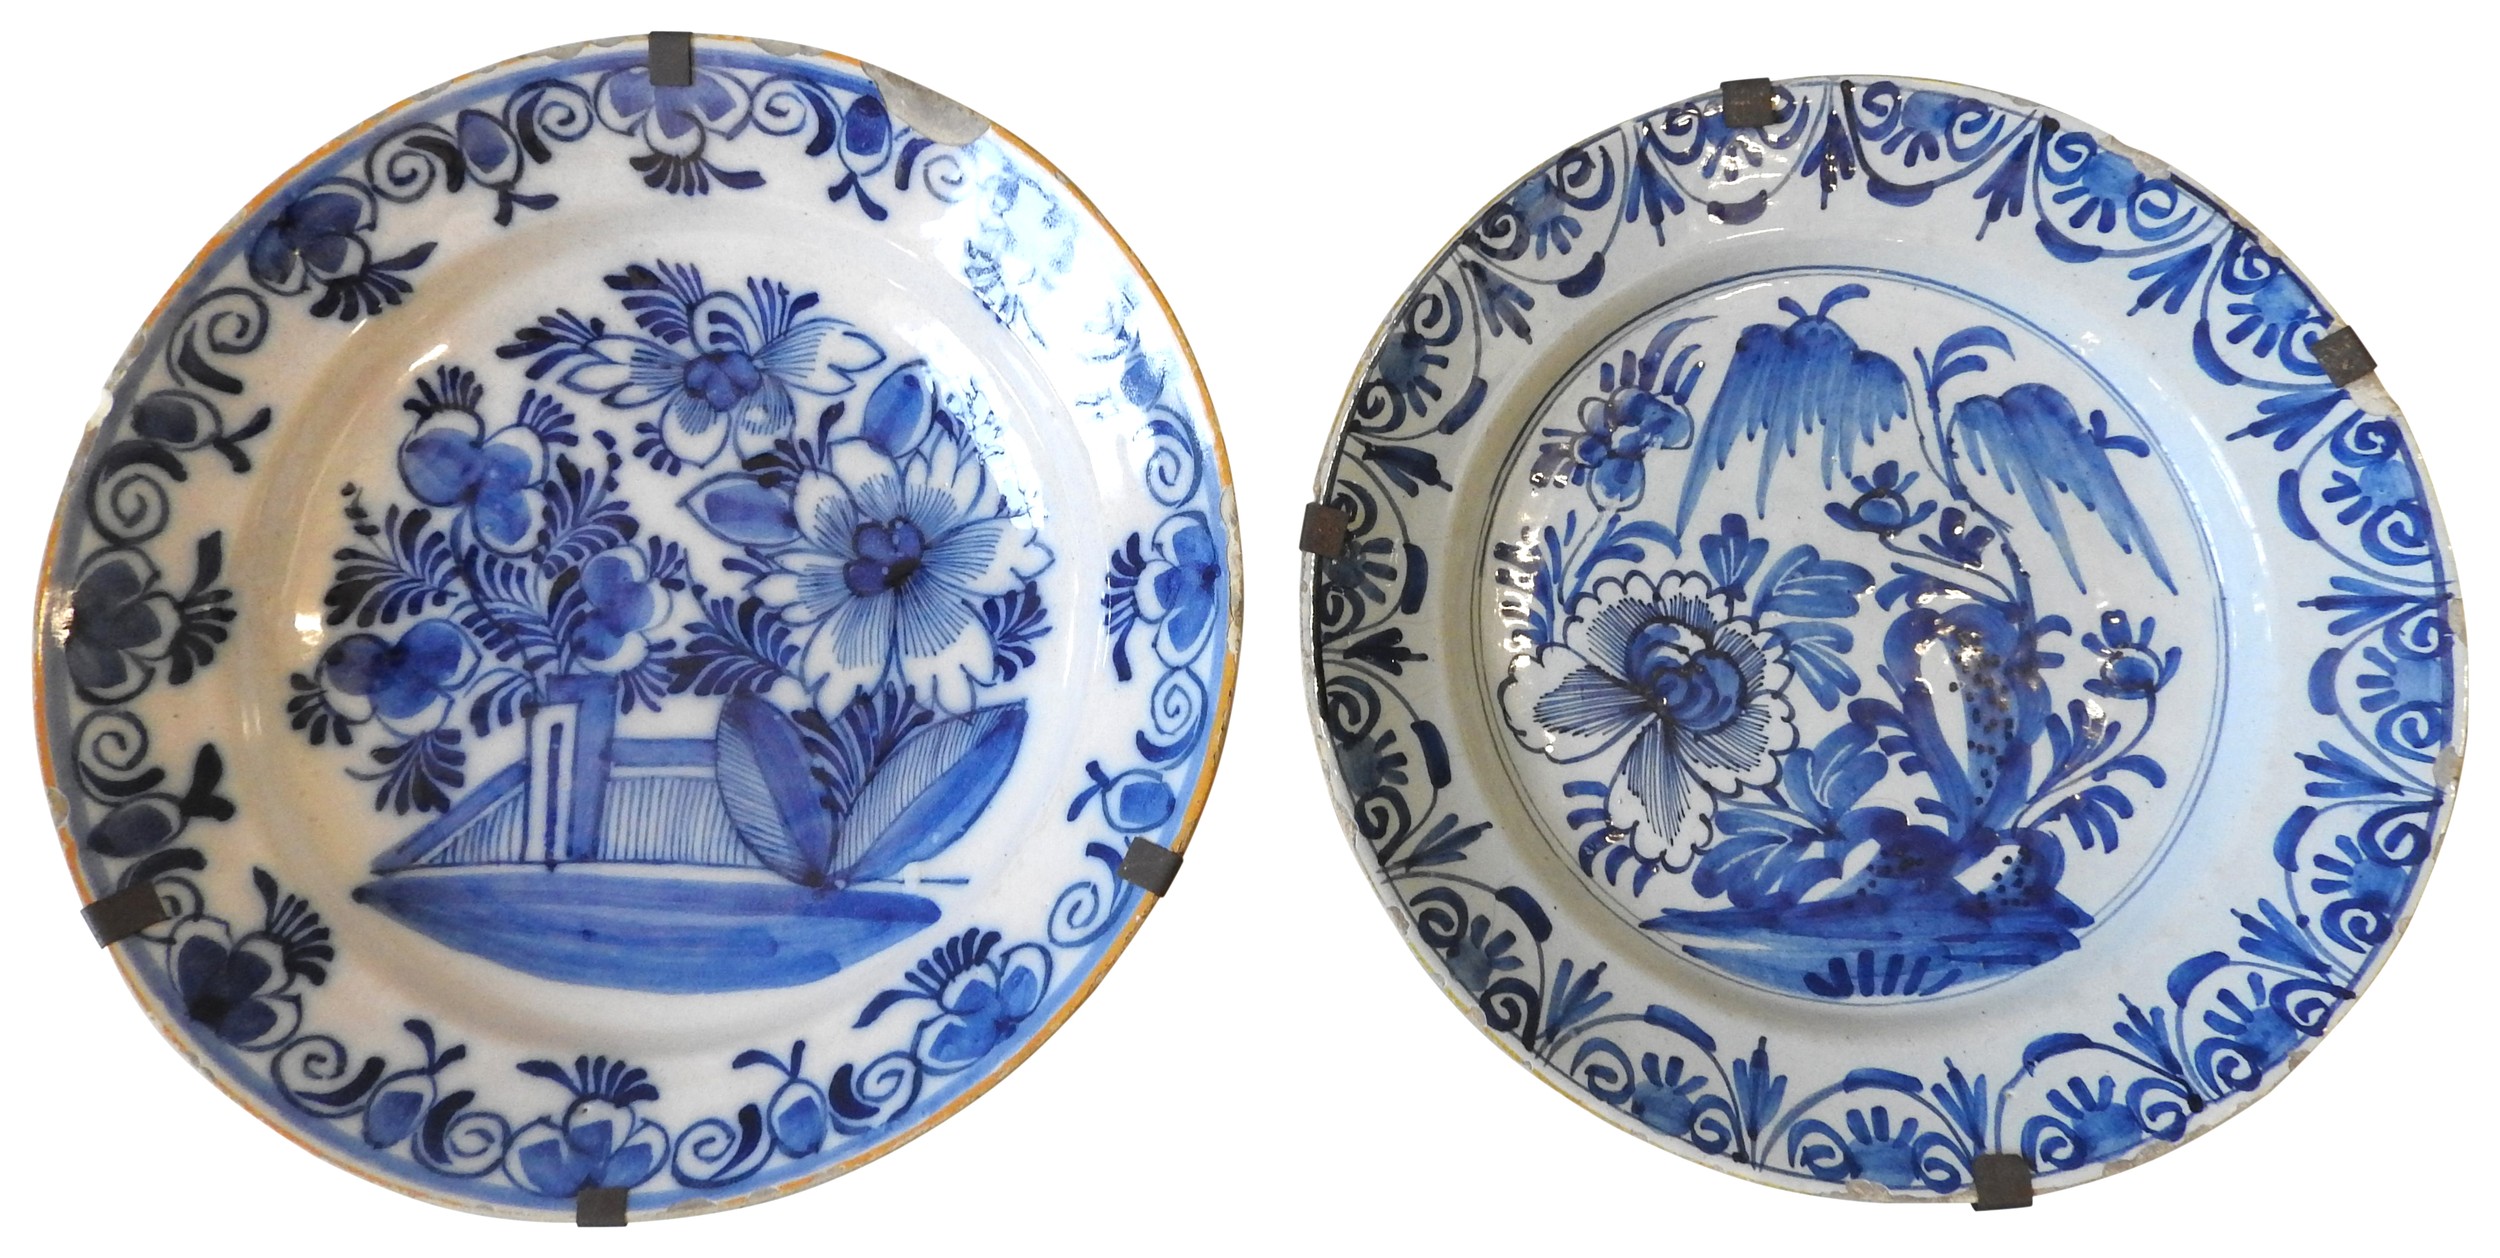 TWO LARGE BLUE & WHITE DELFT PLATES, 18TH CENTURY, both decorated with similar floral and foliate